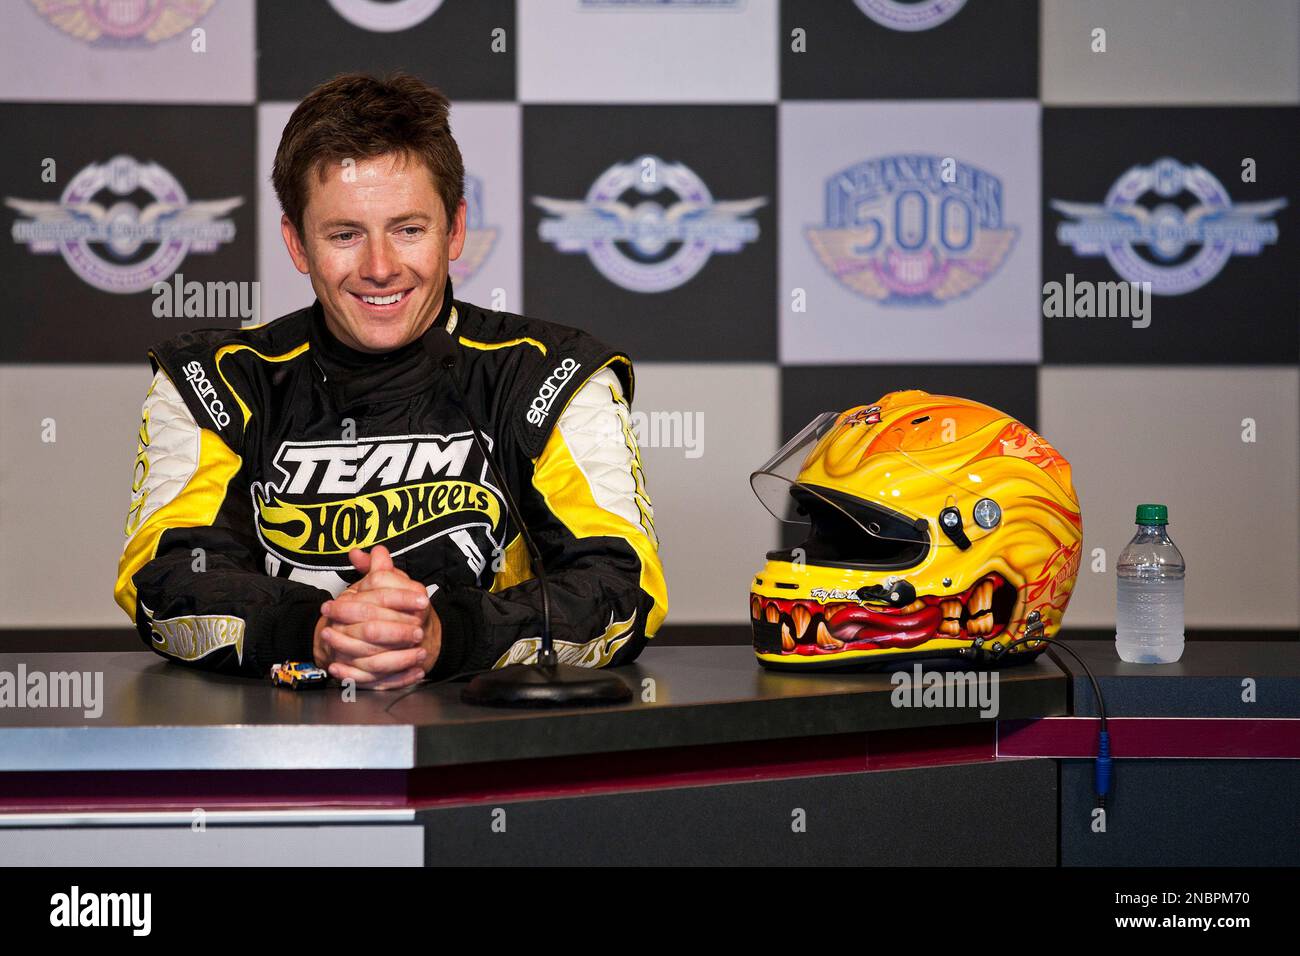 Team Hot Wheels driver Tanner Foust (right) laughs at a question at a press  conference after he set a new world record with a 332 foot distance jump at  the IZOD Presents